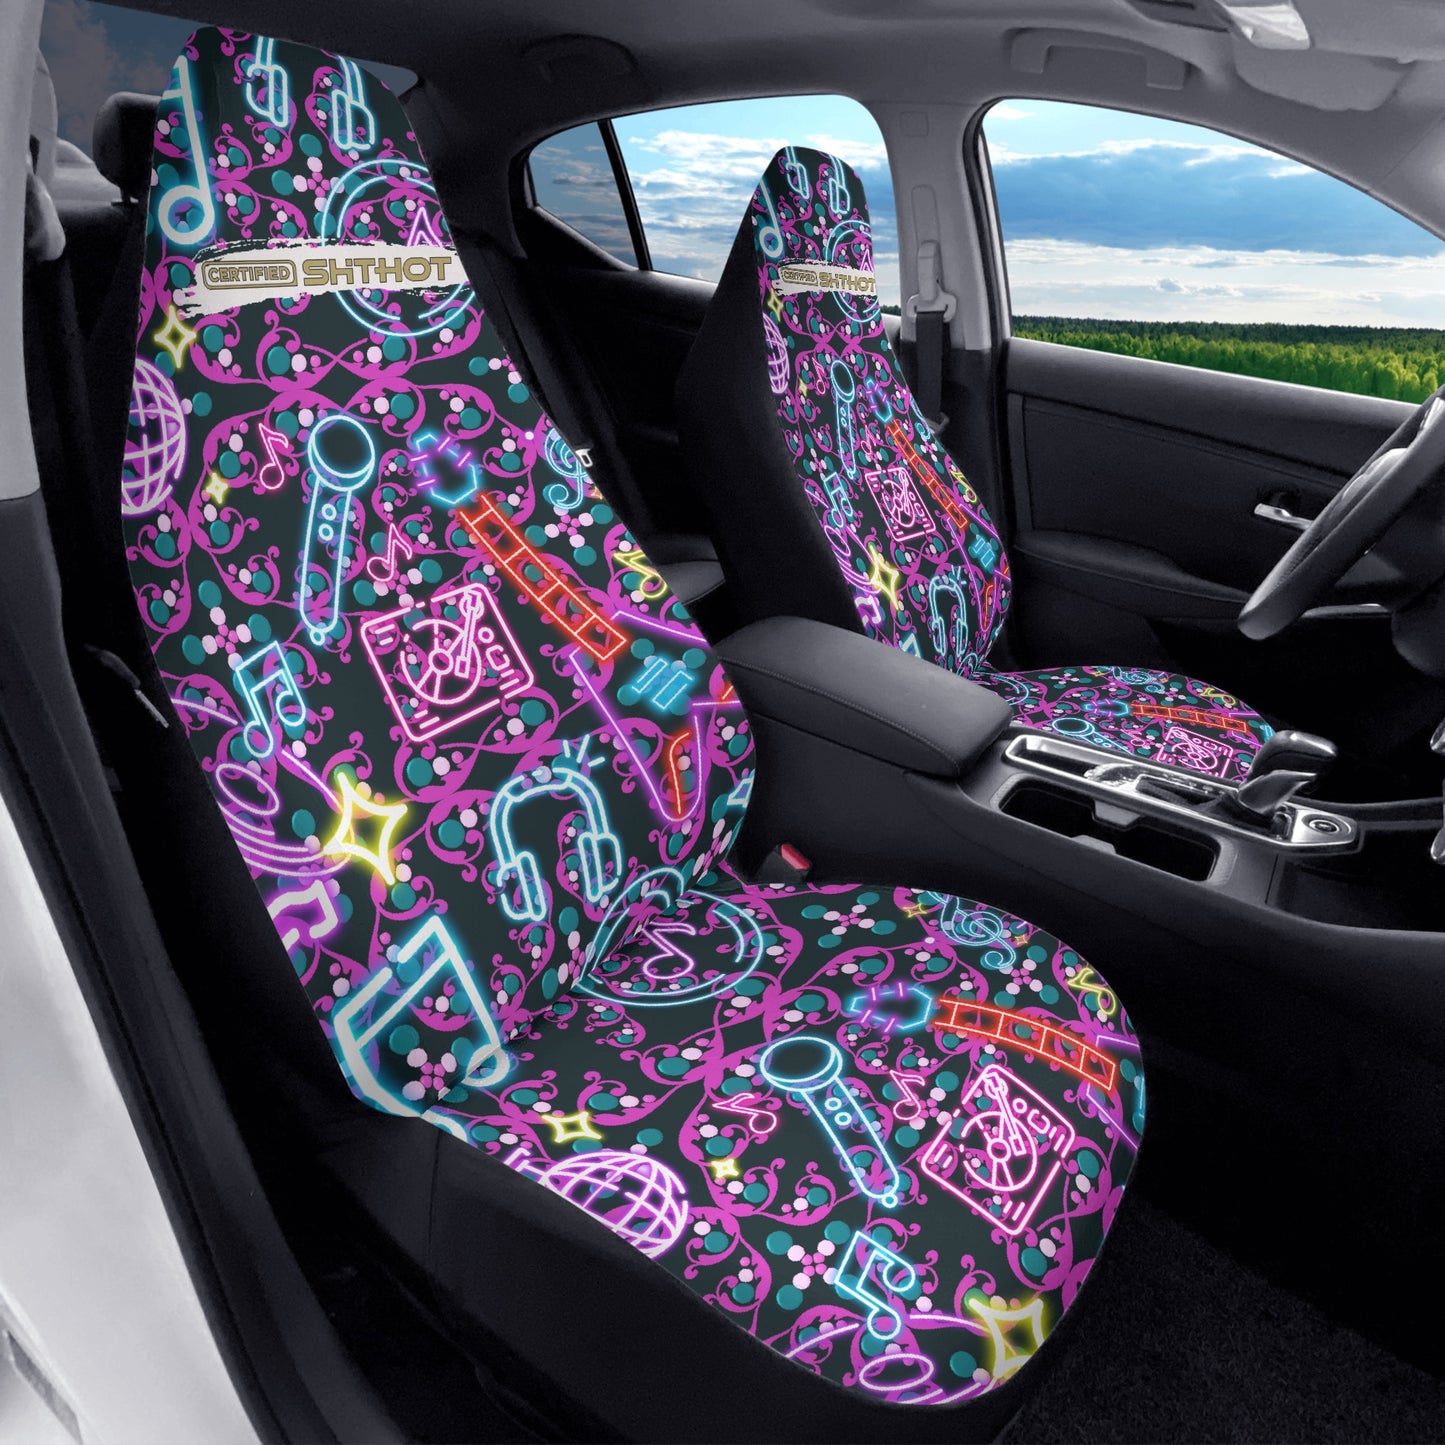 ShitHot Customizable Front Car Seat Covers - Air Jam Neon Blue